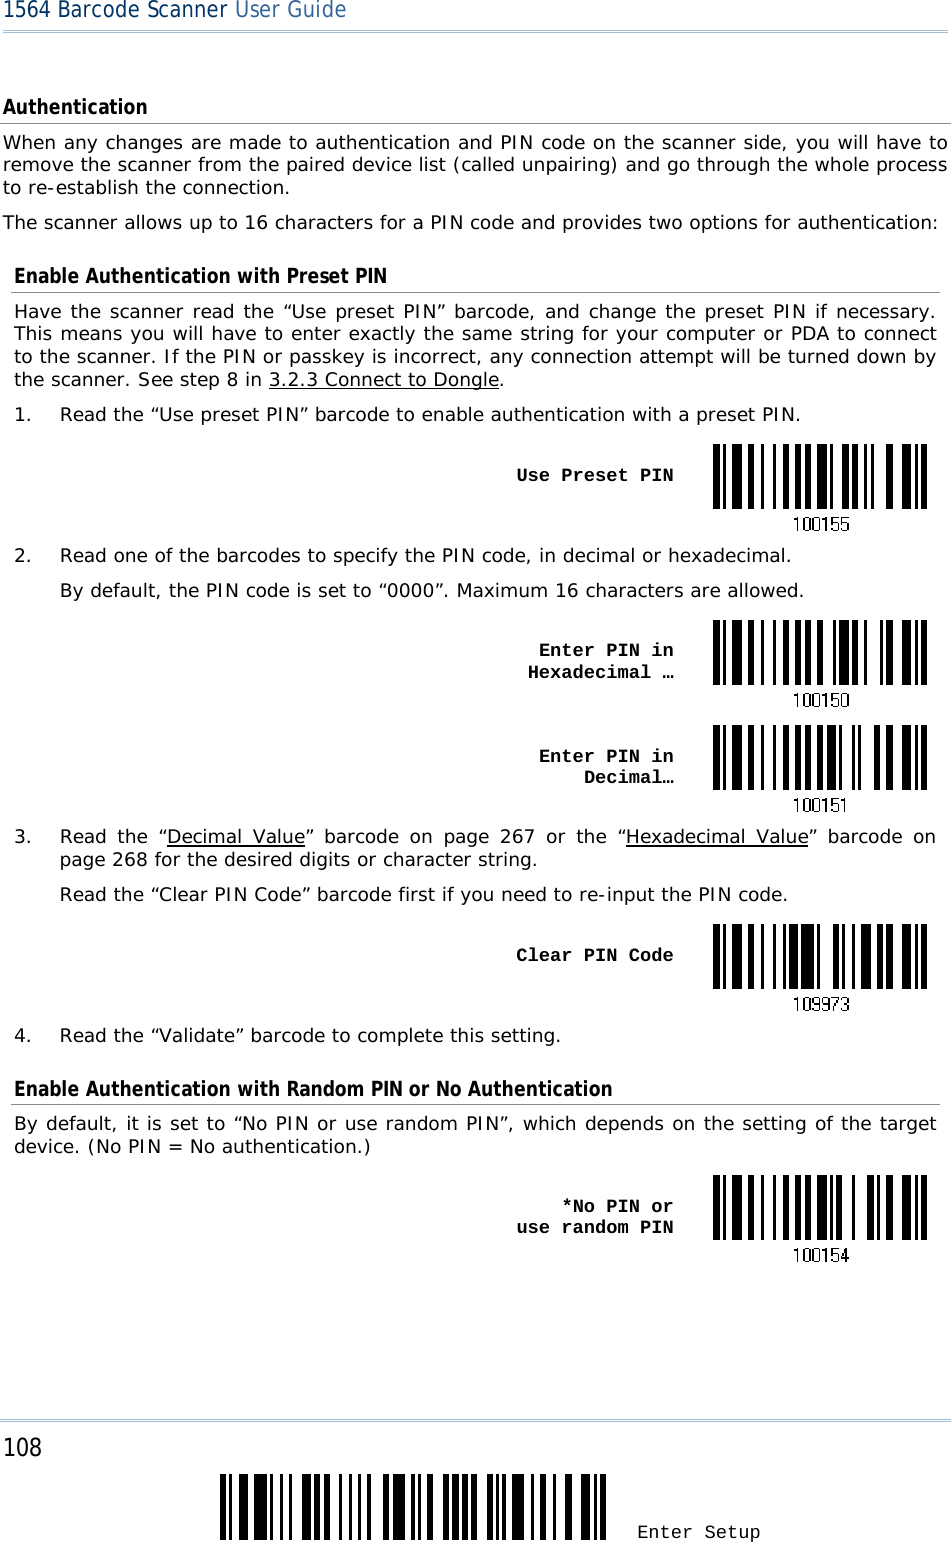 108 Enter Setup 1564 Barcode Scanner User Guide  Authentication When any changes are made to authentication and PIN code on the scanner side, you will have to remove the scanner from the paired device list (called unpairing) and go through the whole process to re-establish the connection. The scanner allows up to 16 characters for a PIN code and provides two options for authentication: Enable Authentication with Preset PIN Have the scanner read the “Use preset PIN” barcode, and change the preset PIN if necessary. This means you will have to enter exactly the same string for your computer or PDA to connect to the scanner. If the PIN or passkey is incorrect, any connection attempt will be turned down by the scanner. See step 8 in 3.2.3 Connect to Dongle. 1.  Read the “Use preset PIN” barcode to enable authentication with a preset PIN.  Use Preset PIN2.  Read one of the barcodes to specify the PIN code, in decimal or hexadecimal. By default, the PIN code is set to “0000”. Maximum 16 characters are allowed.  Enter PIN in Hexadecimal … Enter PIN in Decimal…3.  Read the “Decimal Value” barcode on page 267 or the “Hexadecimal Value” barcode on page 268 for the desired digits or character string. Read the “Clear PIN Code” barcode first if you need to re-input the PIN code.  Clear PIN Code4.  Read the “Validate” barcode to complete this setting. Enable Authentication with Random PIN or No Authentication By default, it is set to “No PIN or use random PIN”, which depends on the setting of the target device. (No PIN = No authentication.)  *No PIN or  use random PIN     